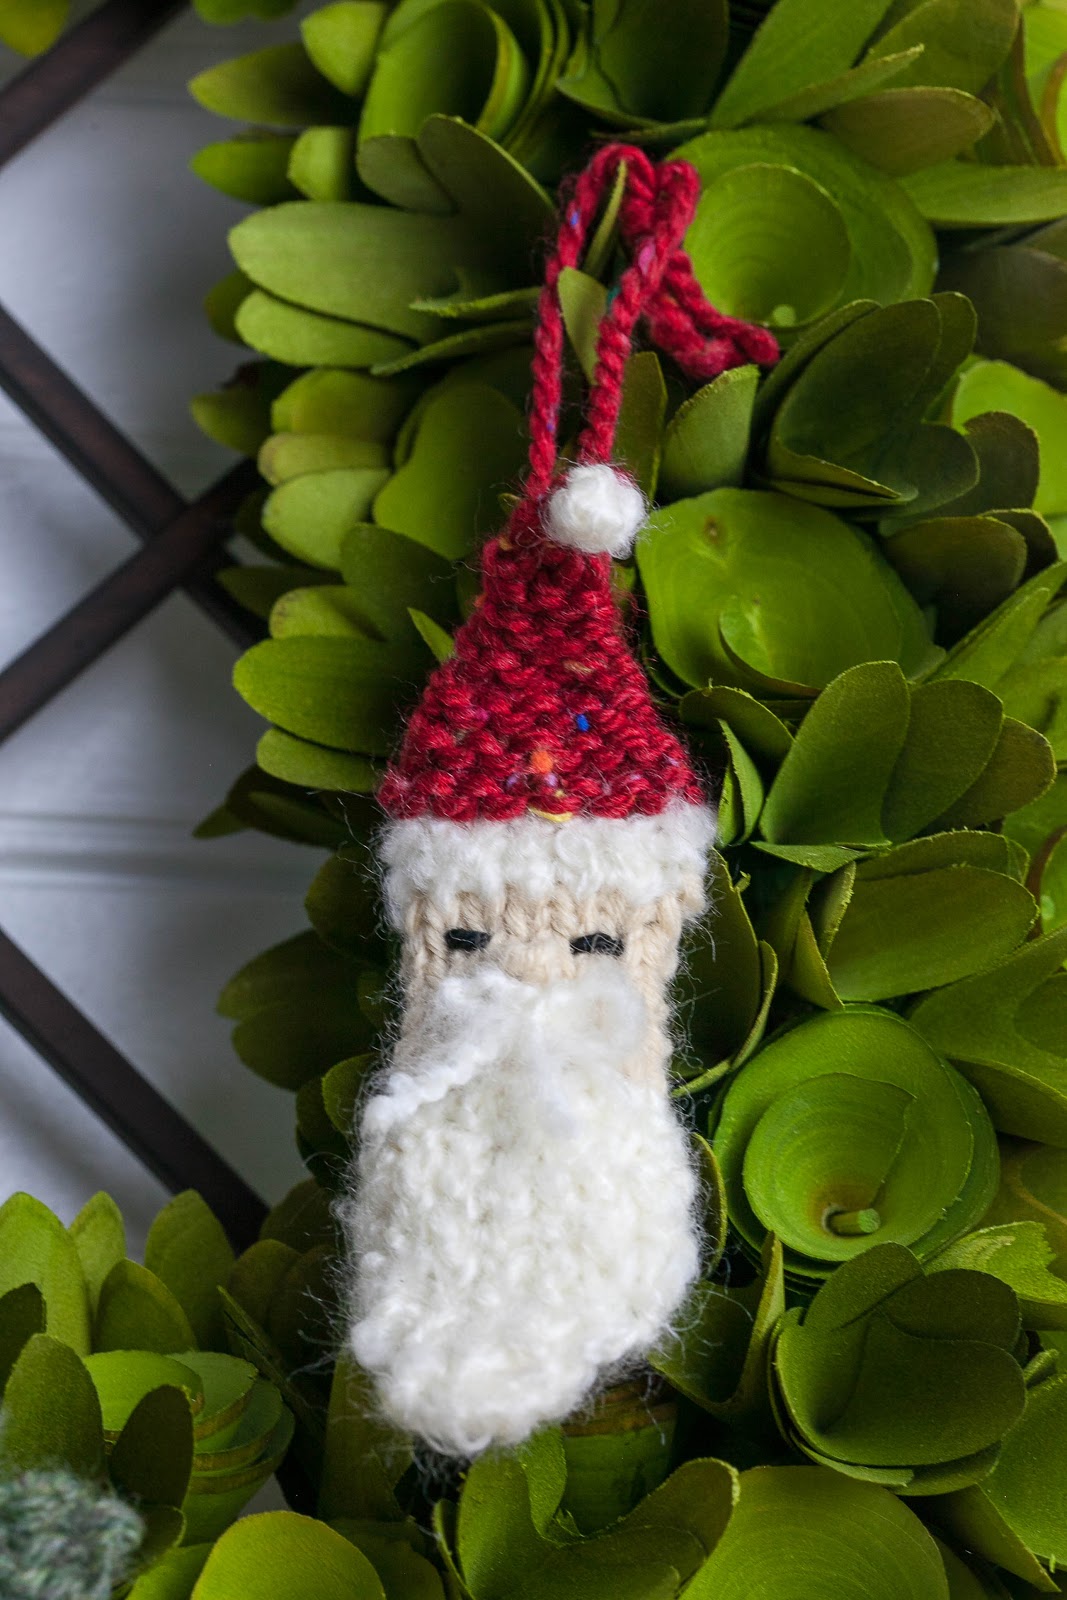 Loom Knit Christmas Ornaments (Free) | Loom Knitting by This Moment is Good!